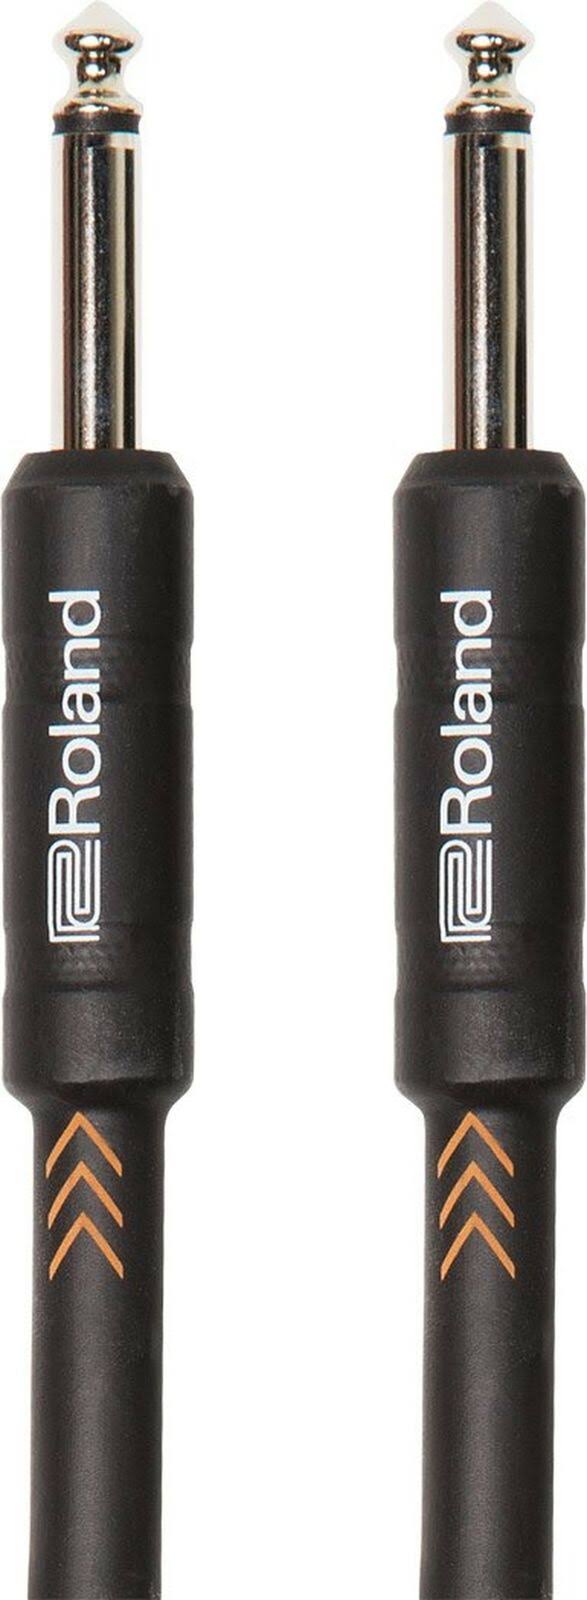 Roland RIC-B10 10ft / 3m Instrument Cable, Straight/Straight 1/4 Jack